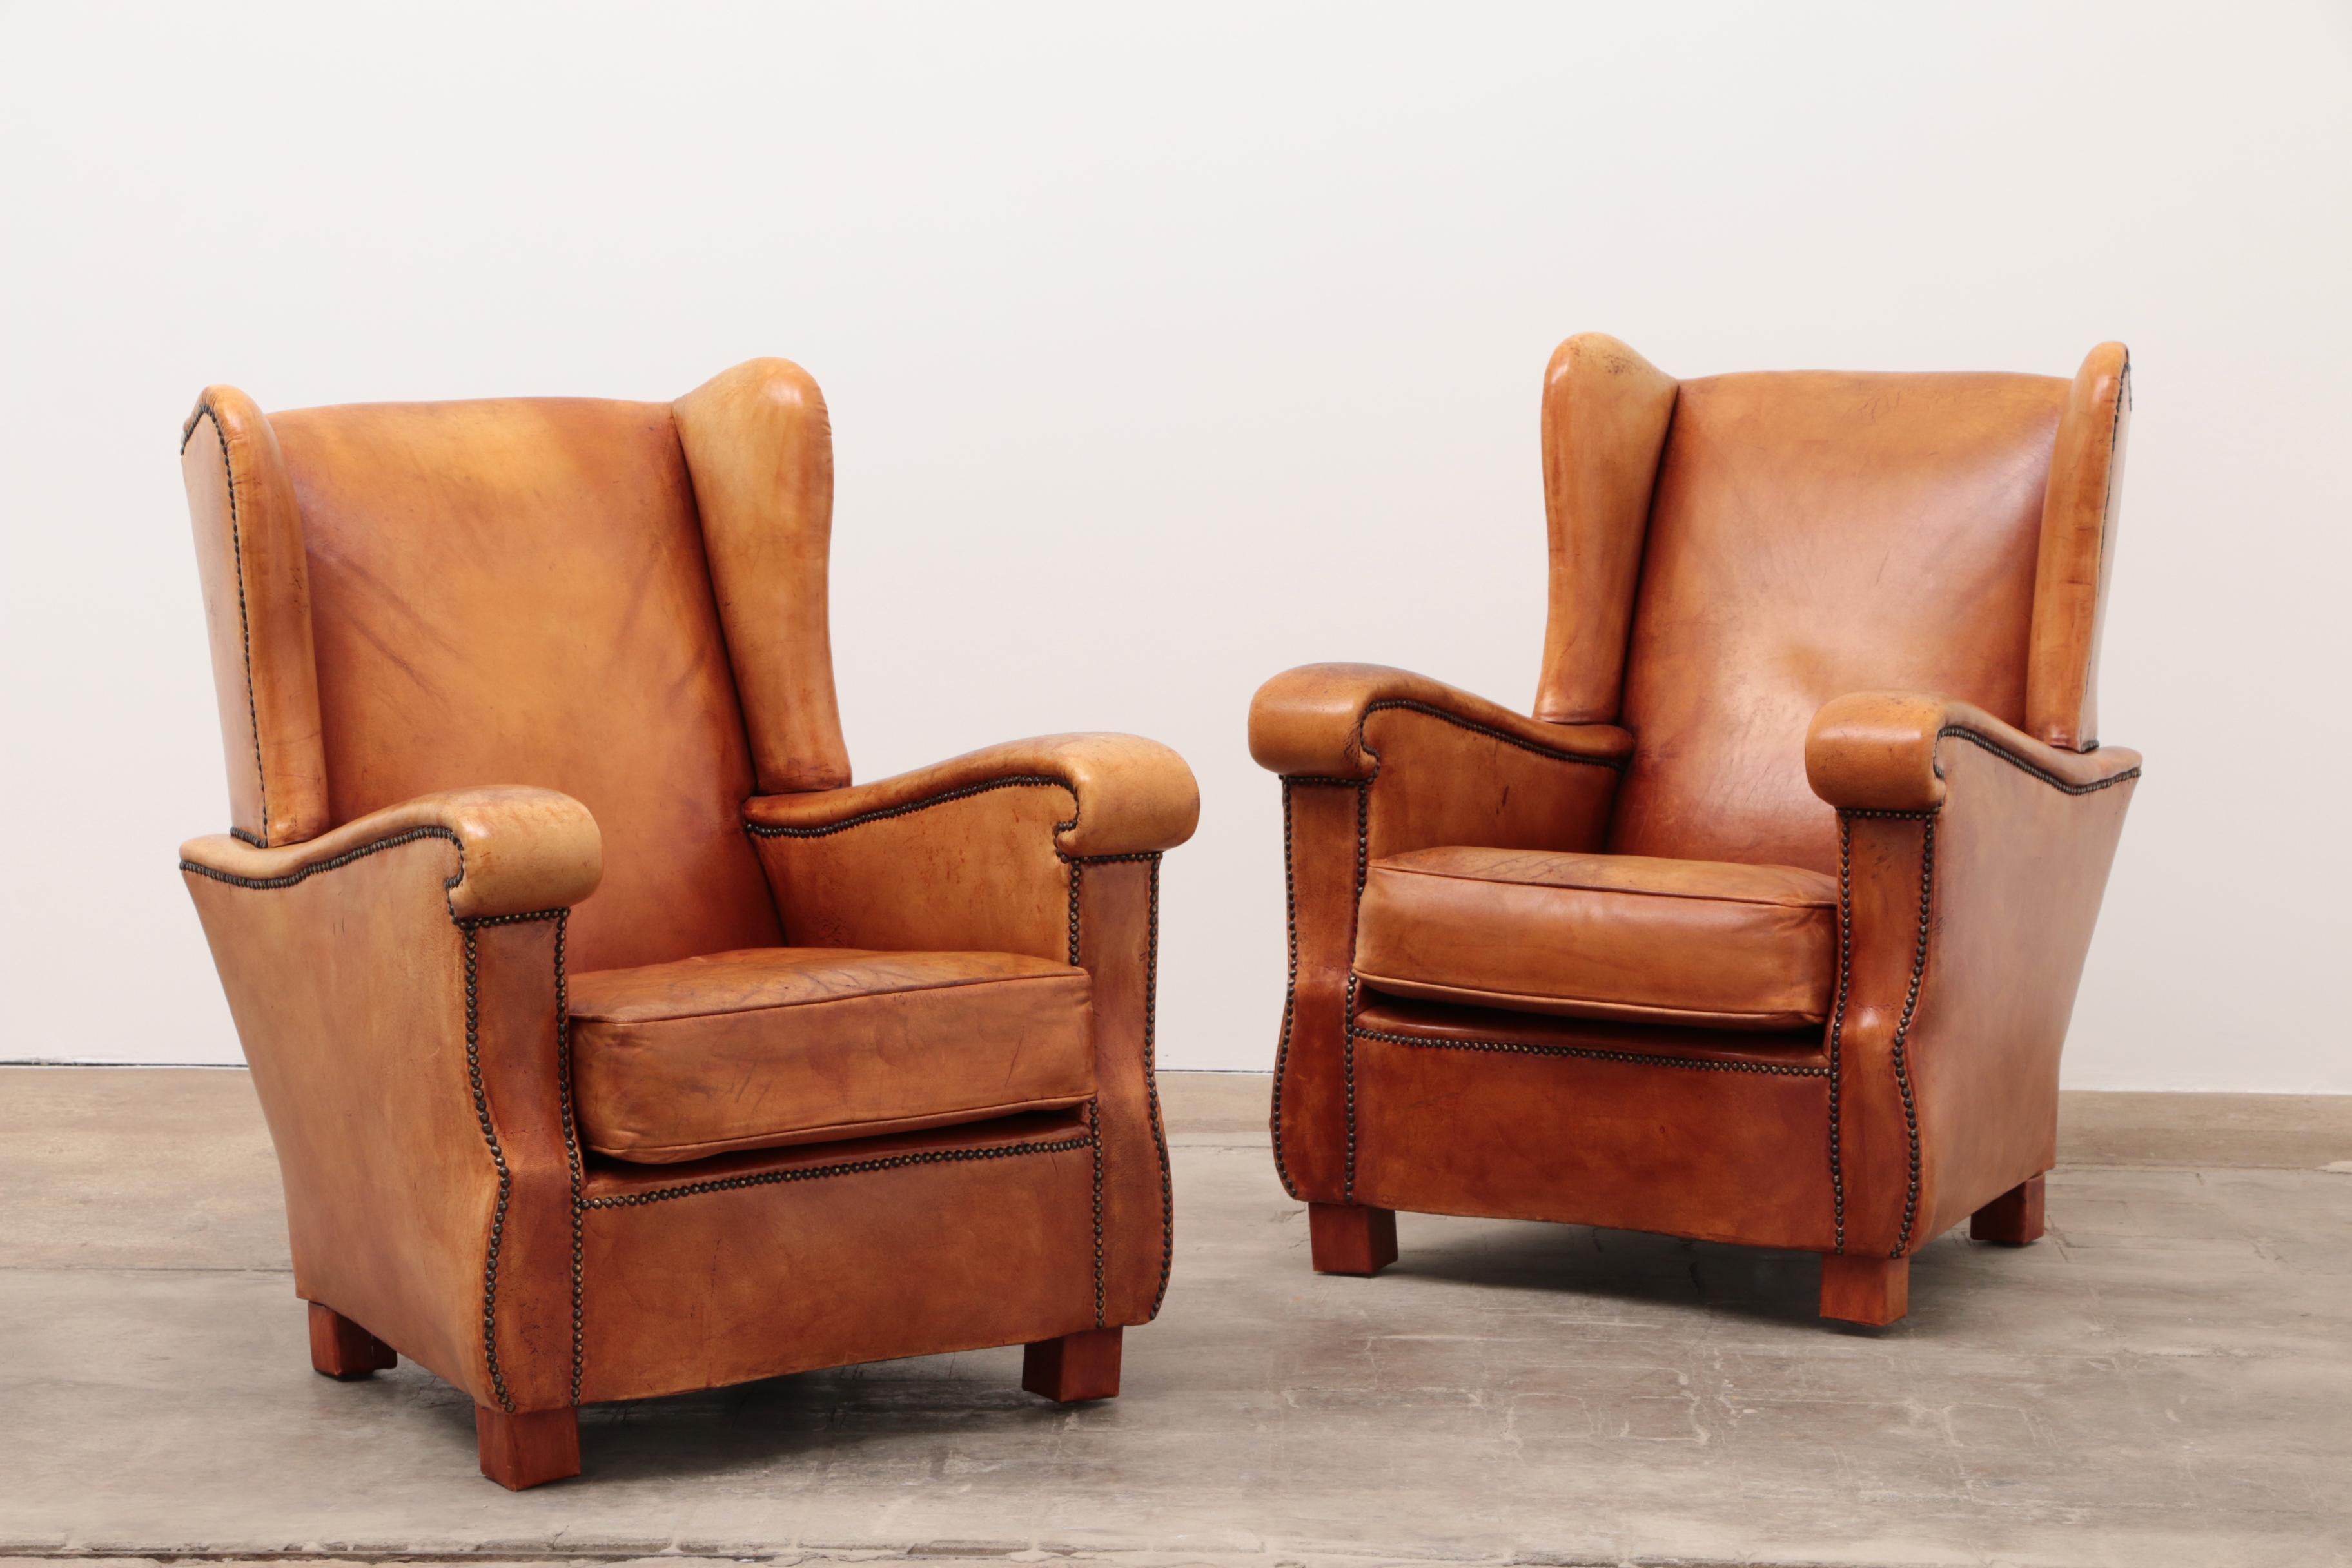 Dutch Set of Two Sheepskin Leather Armchairs, 1970, Netherlands